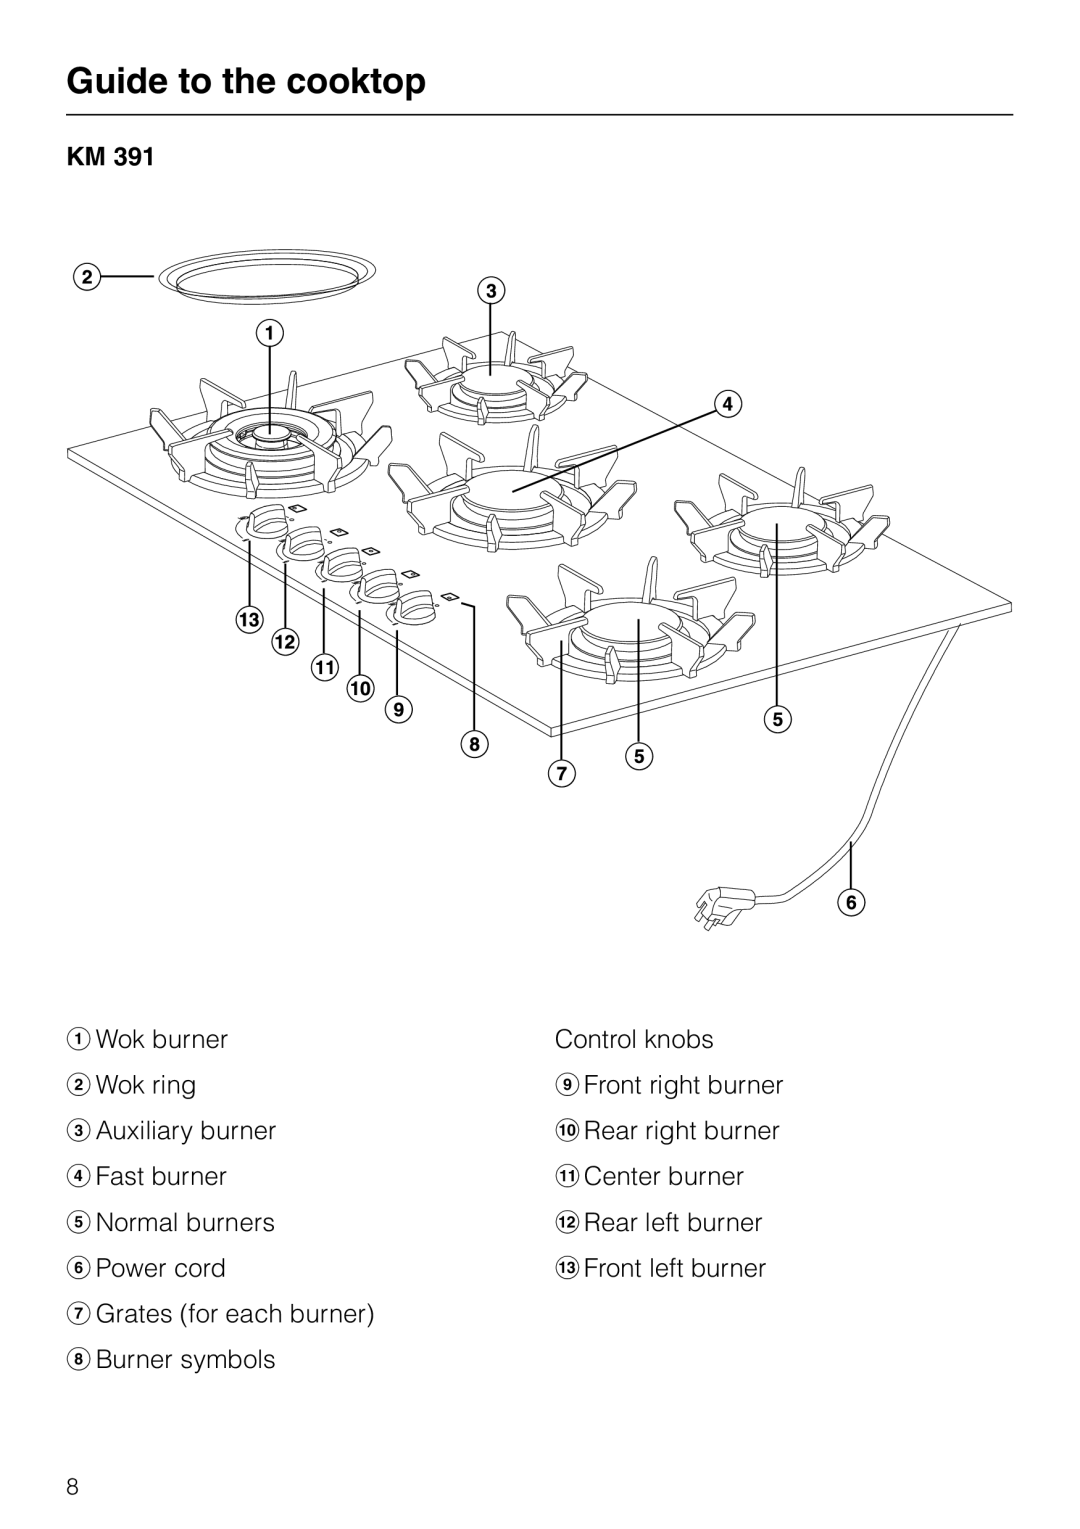 Miele KM 391 manual Guide to the cooktop 